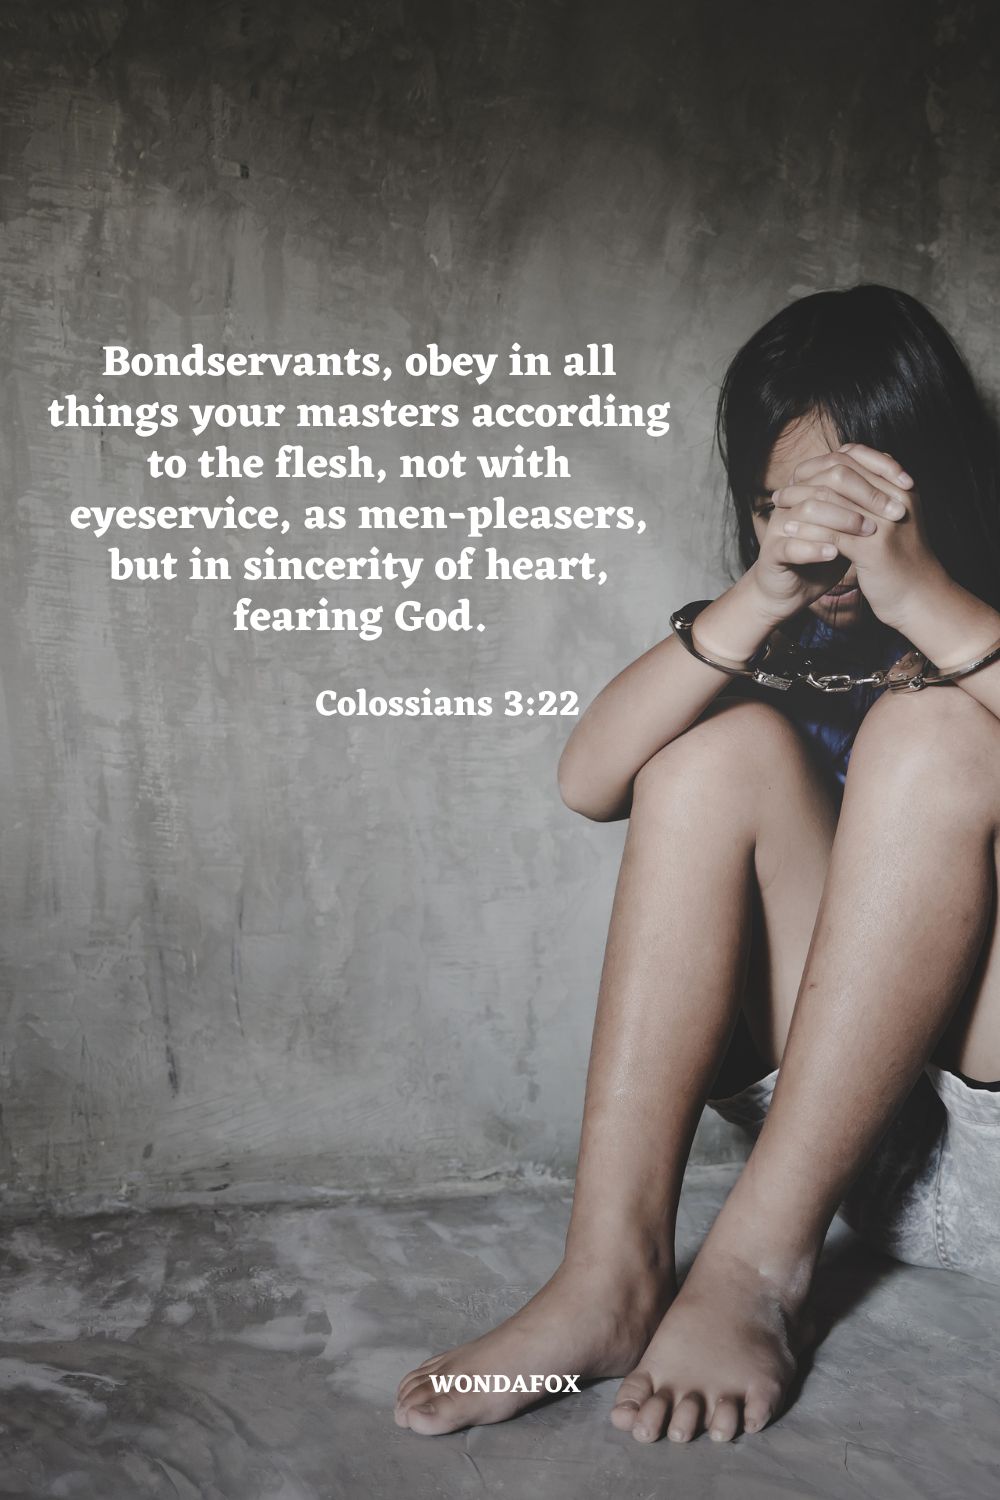 Bondservants, obey in all things your masters according to the flesh, not with eyeservice, as men-pleasers, but in sincerity of heart, fearing God.
Colossians 3:22